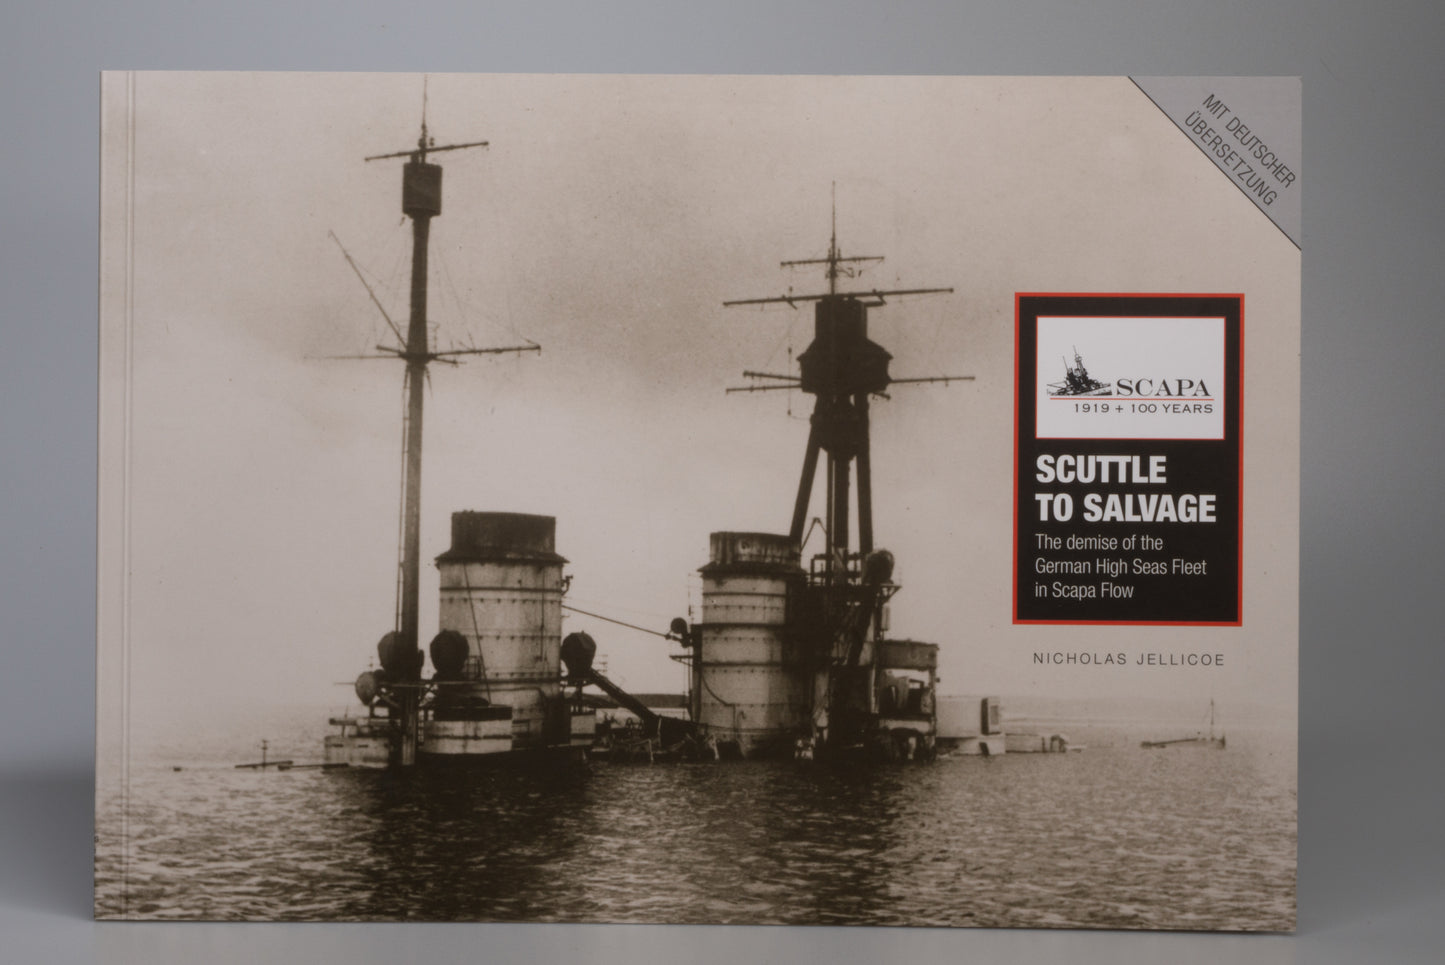 Scuttle to Salvage: The demise of the German High Seas Fleet in Scapa Flow